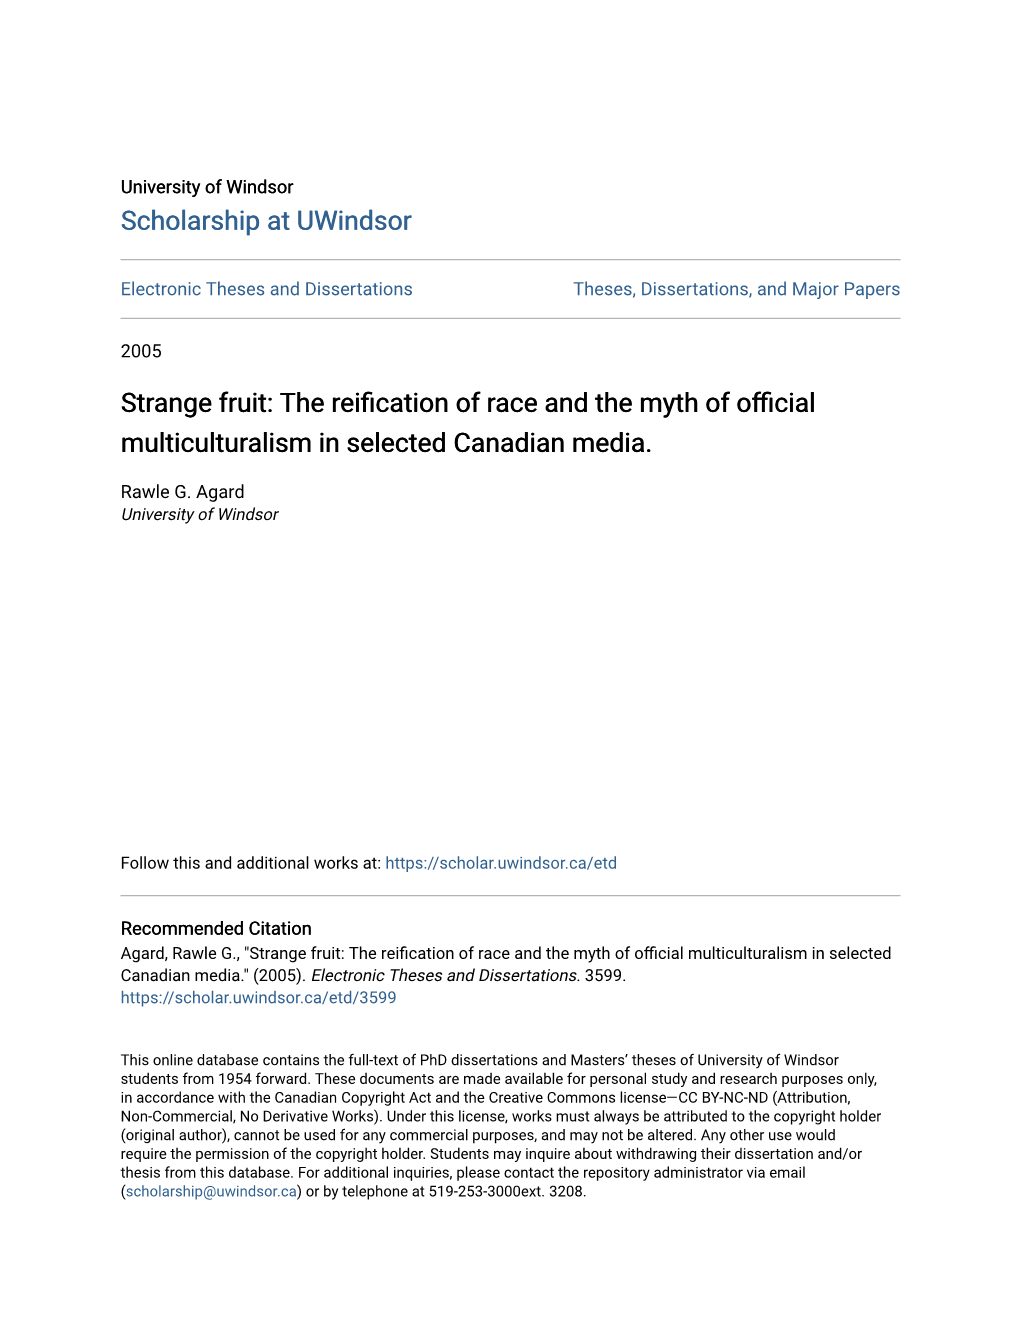 The Reification of Race and the Myth of Official Multiculturalism in Selected Canadian Media